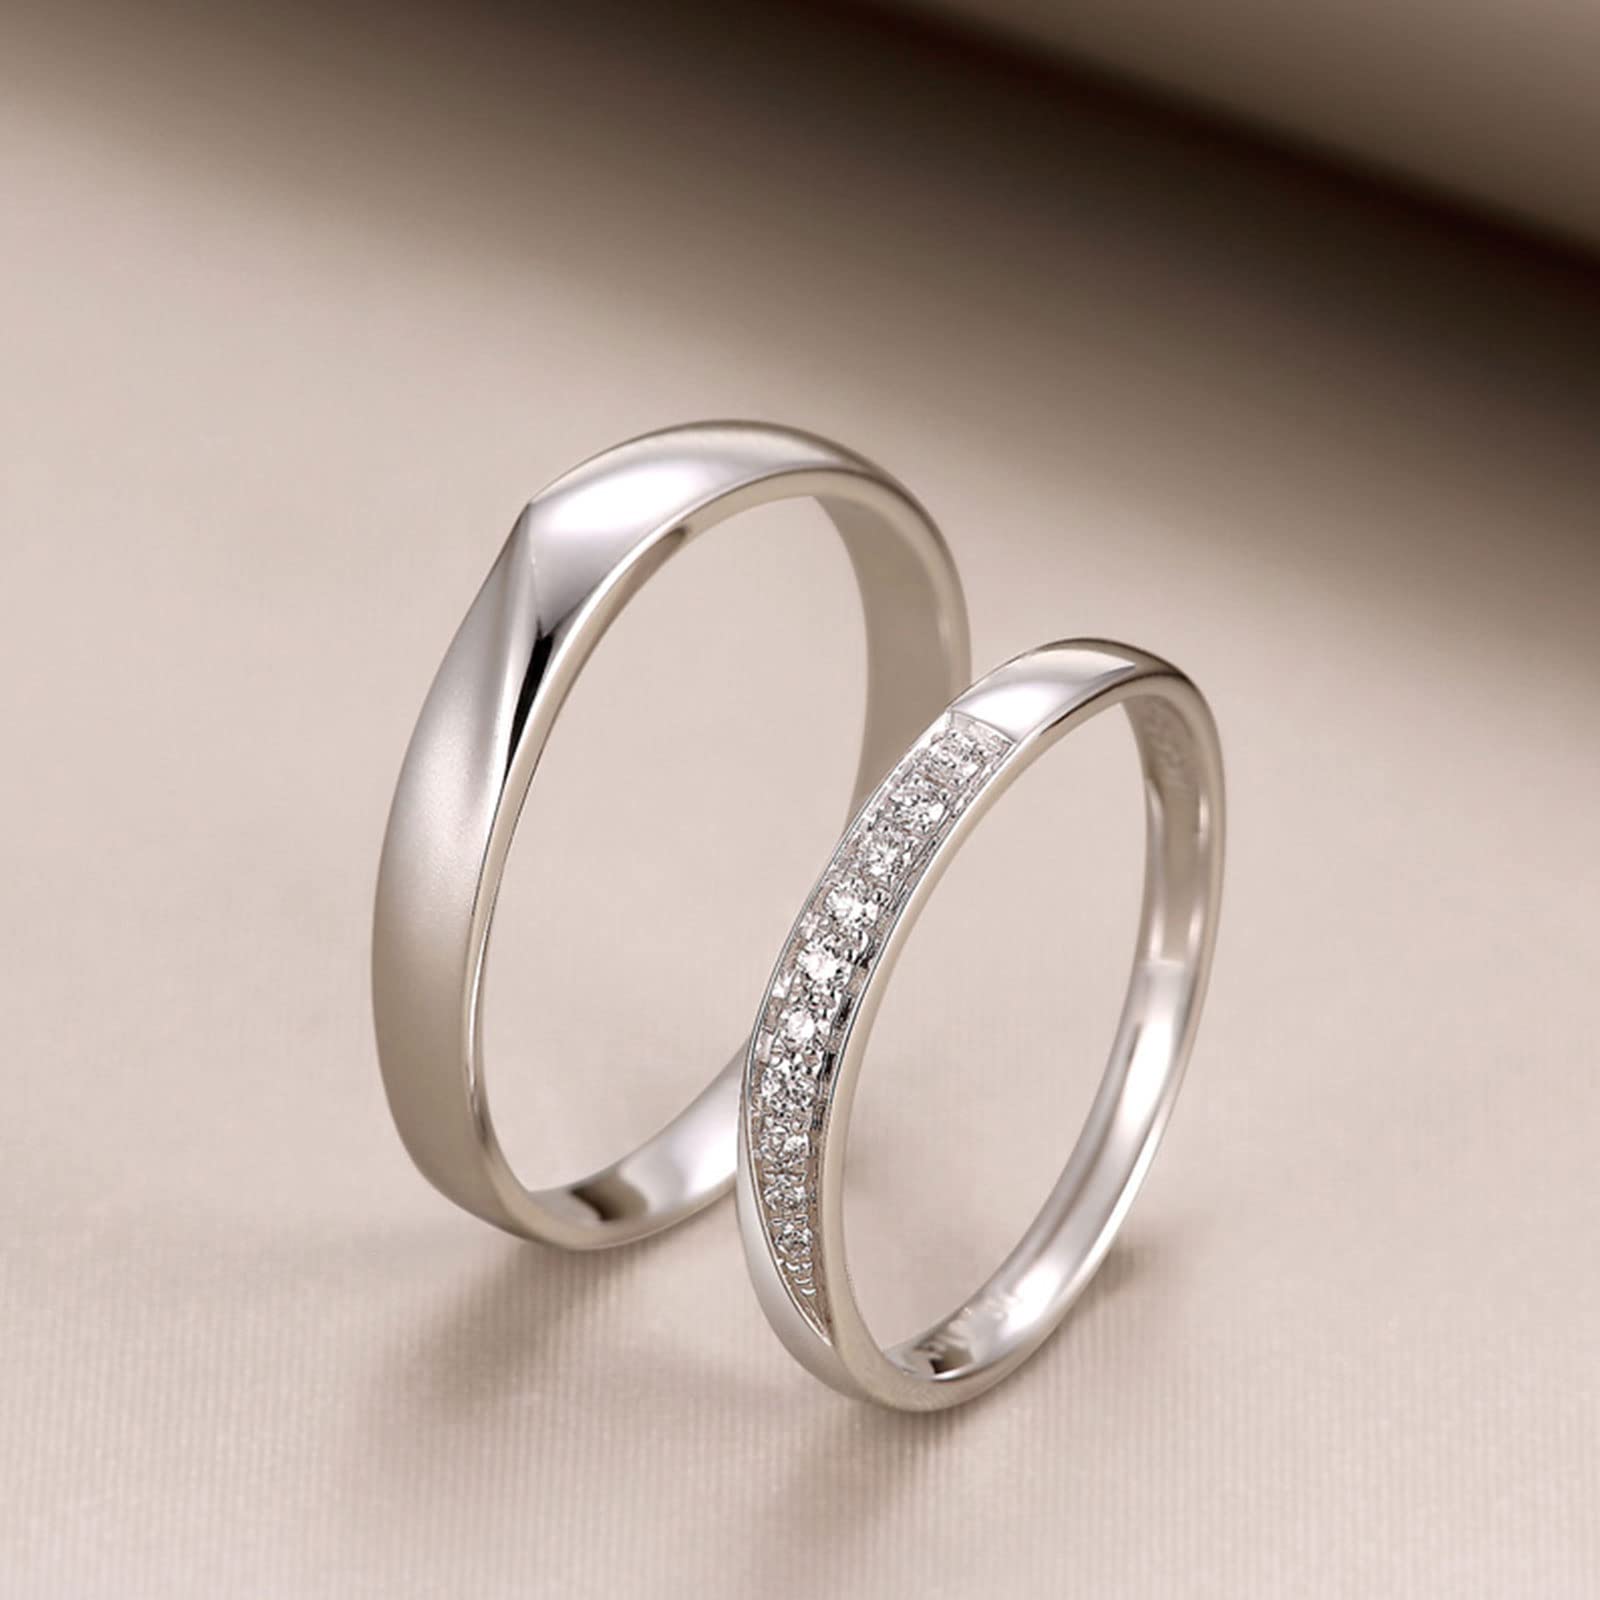 WSX Tiny Diamond Silver Or Solid 10K/14K/18K White Gold Couple Rings, Matching Rings for Him and Her Set Wedding Bands Promise Engagement Ring, Available in Size 3-15.5